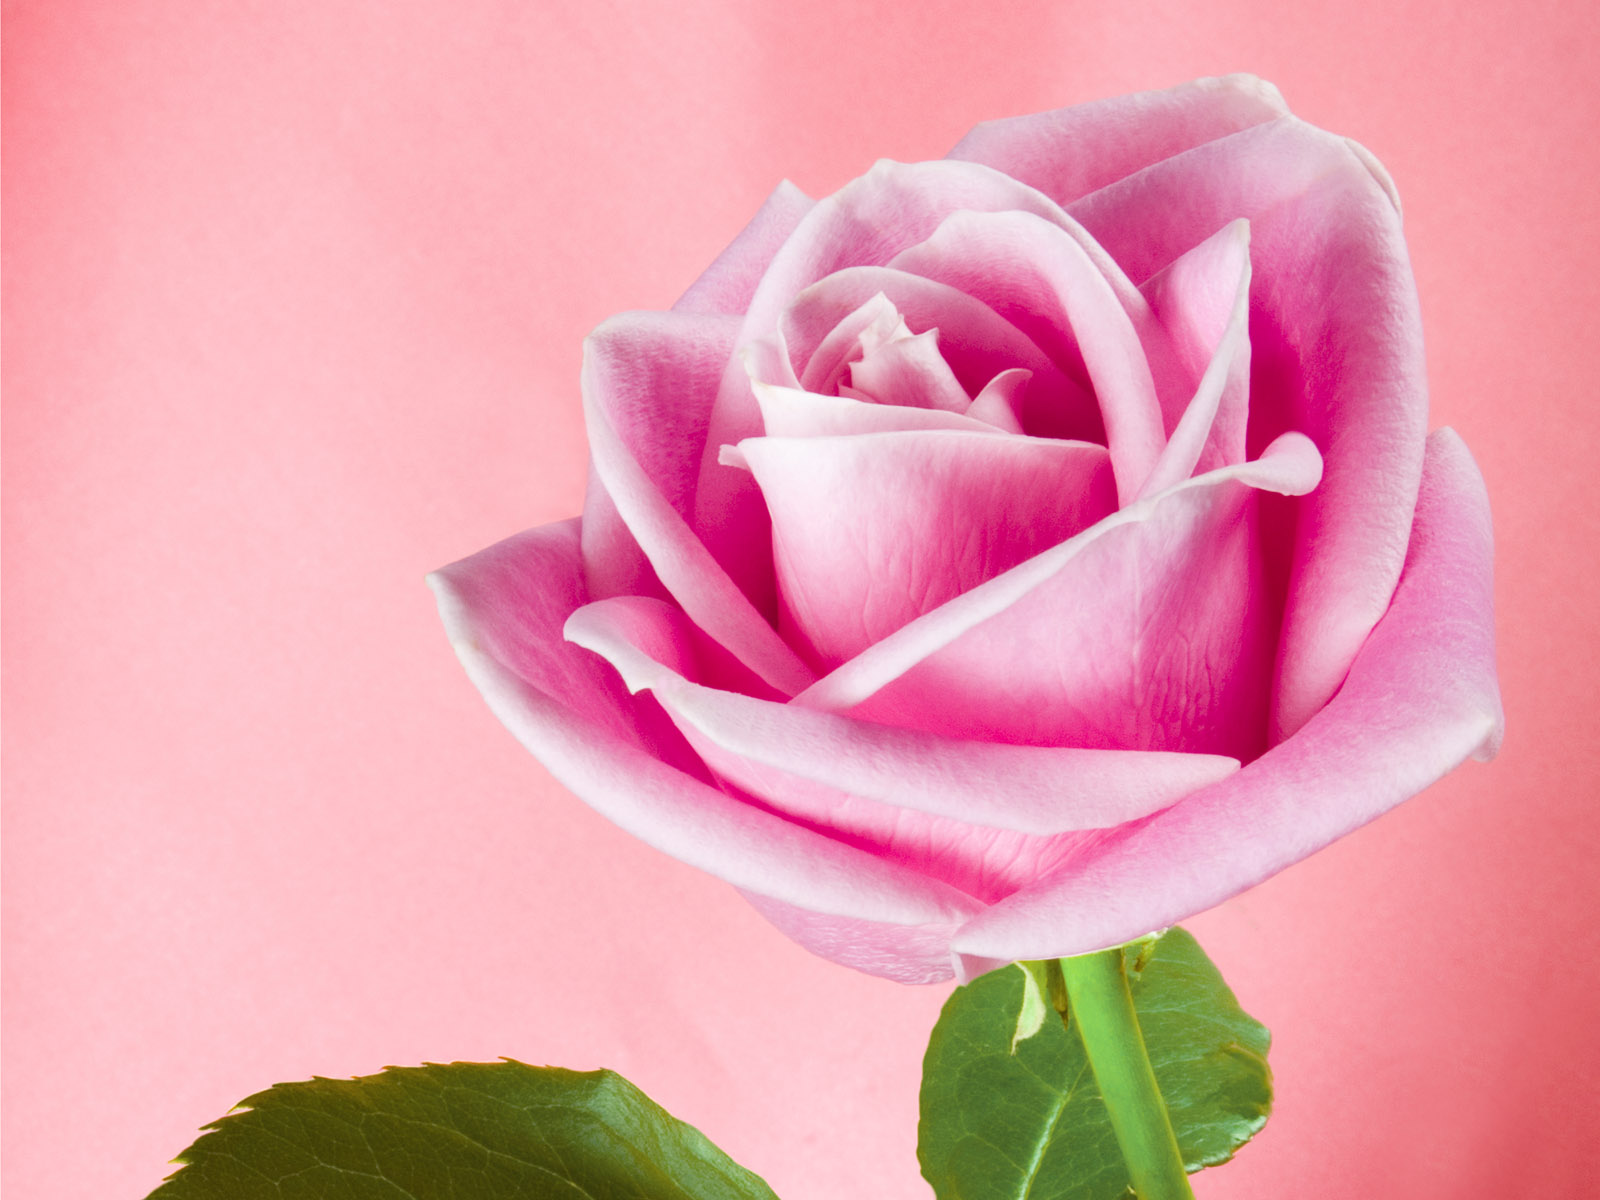 Flowers Image Pink Rose HD Wallpaper And Background Photos